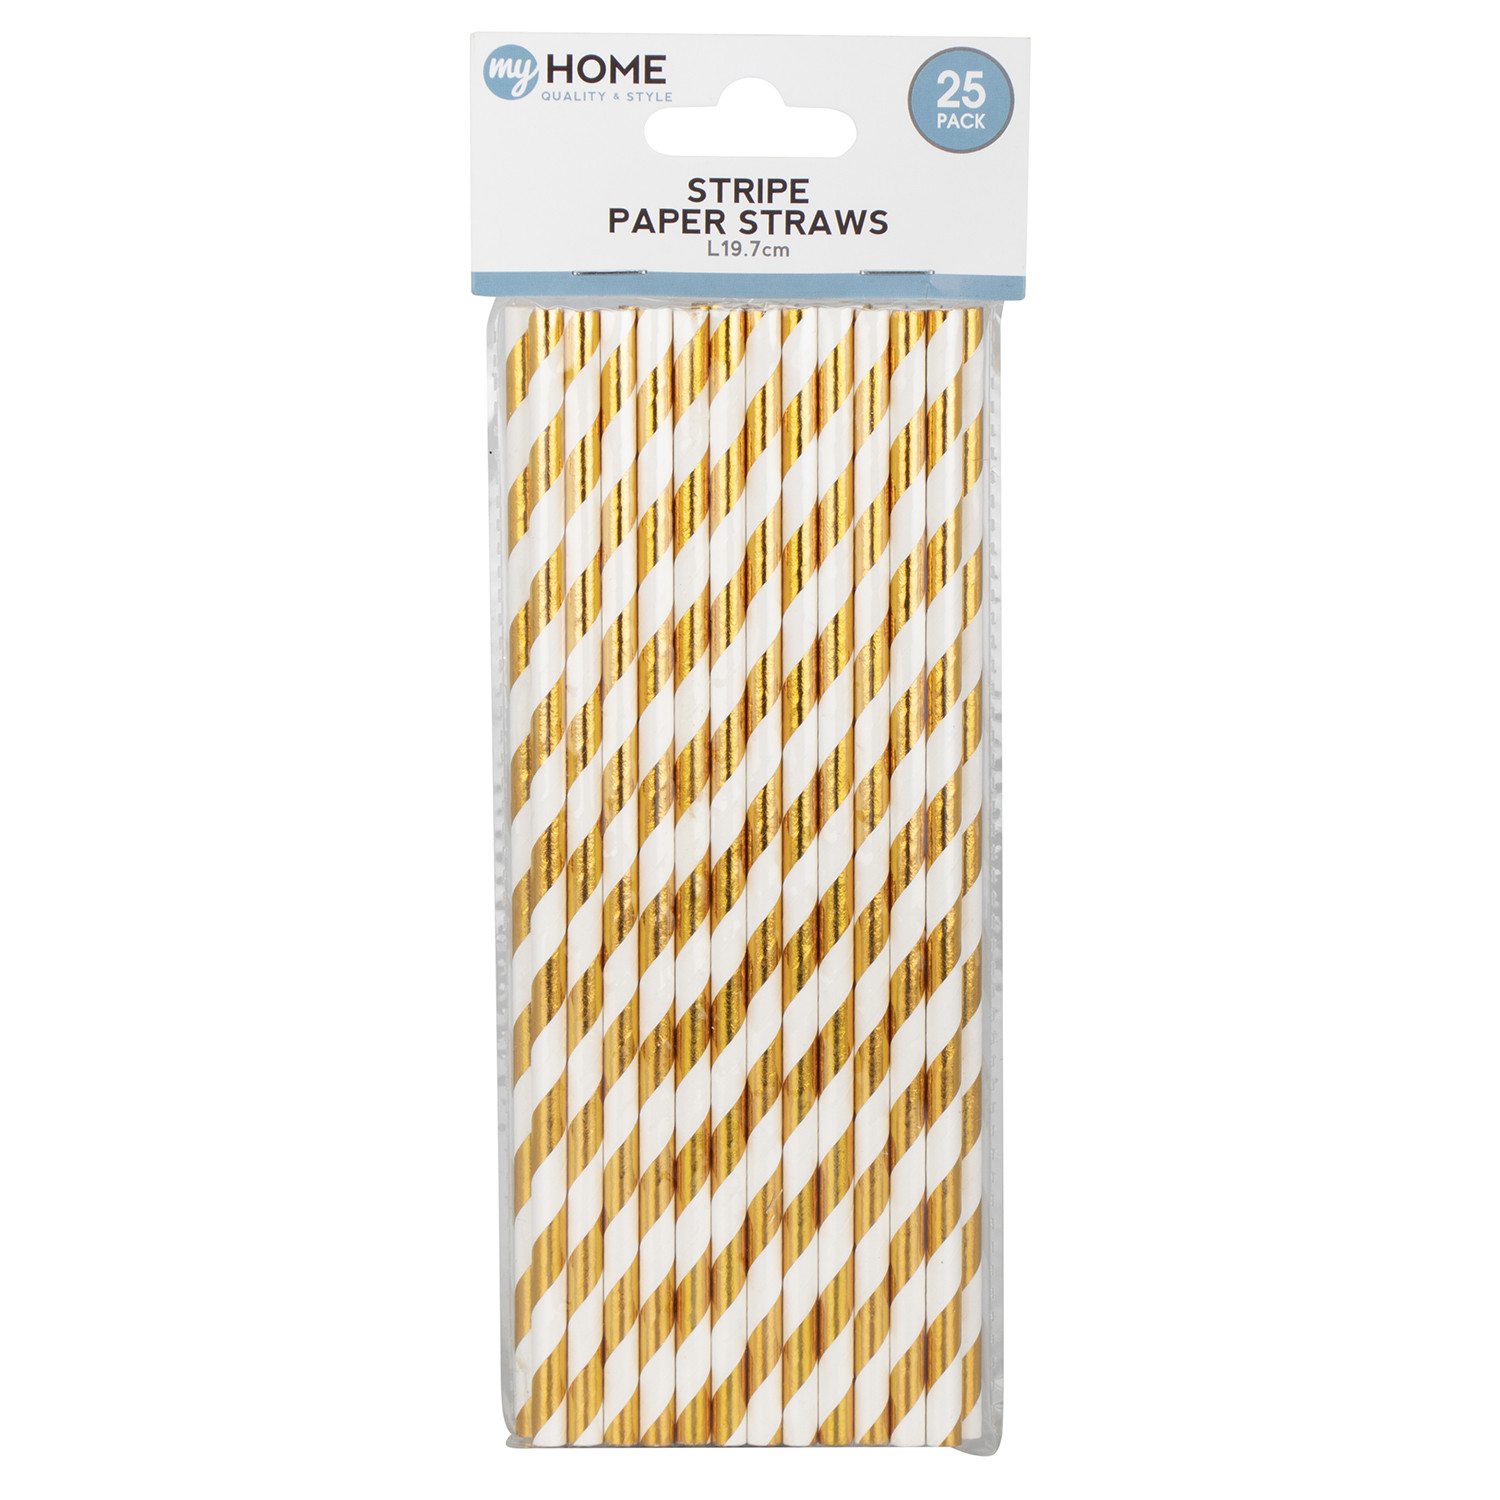 Pack of 25 Striped Paper Straws Image 1